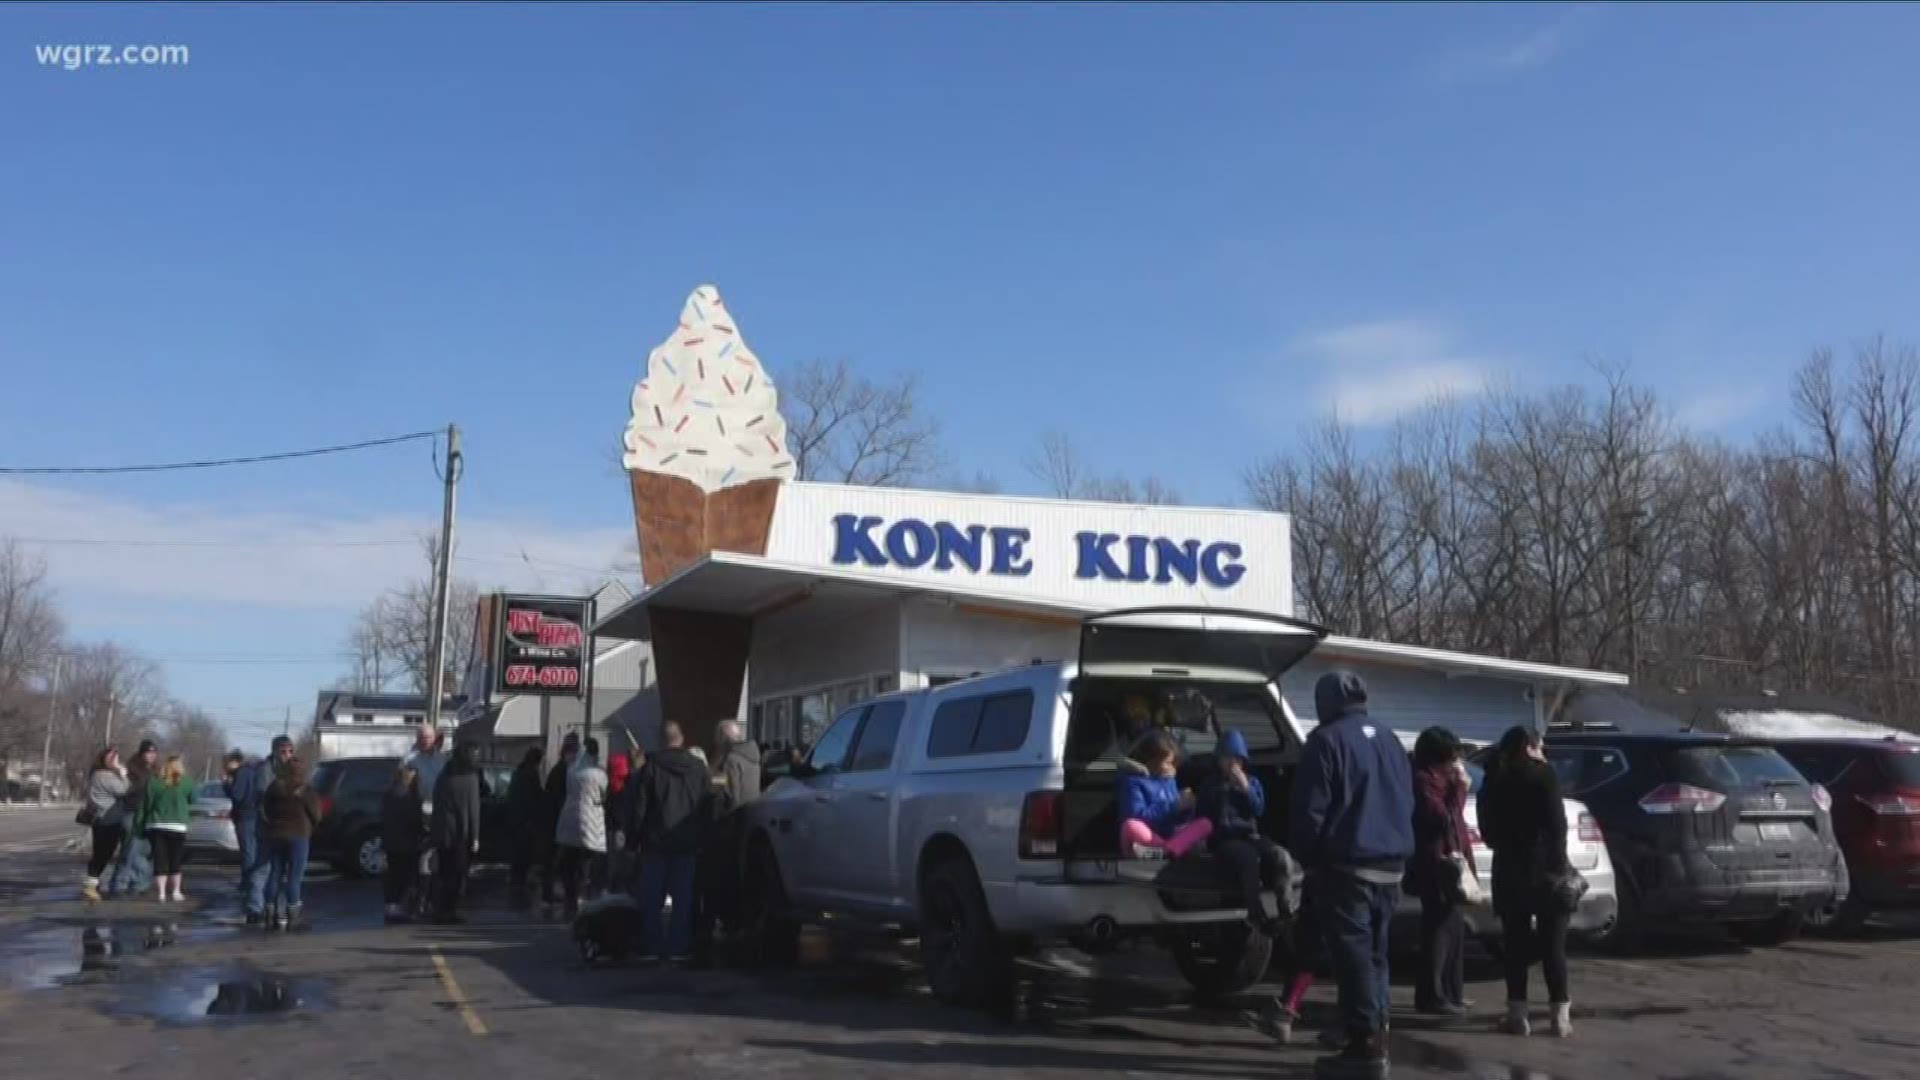 This is a tradition every year for Kone King on Center Road. Thankfully, today was beautiful and sunny, inspiring a lot of families to get out and enjoy a free cone.